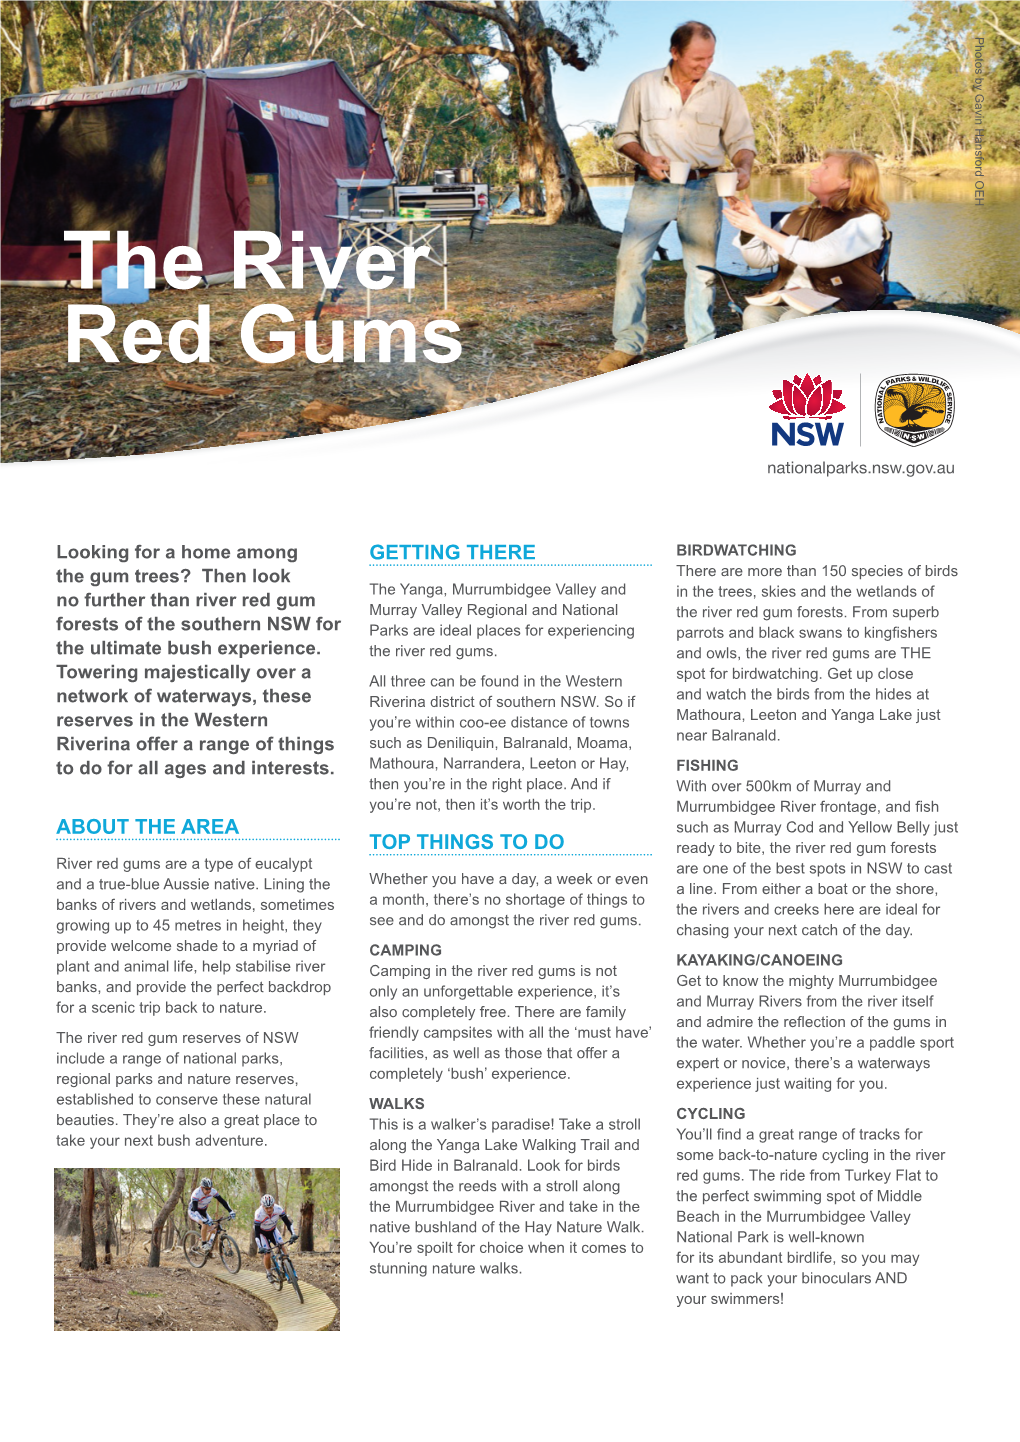 The River Red Gums